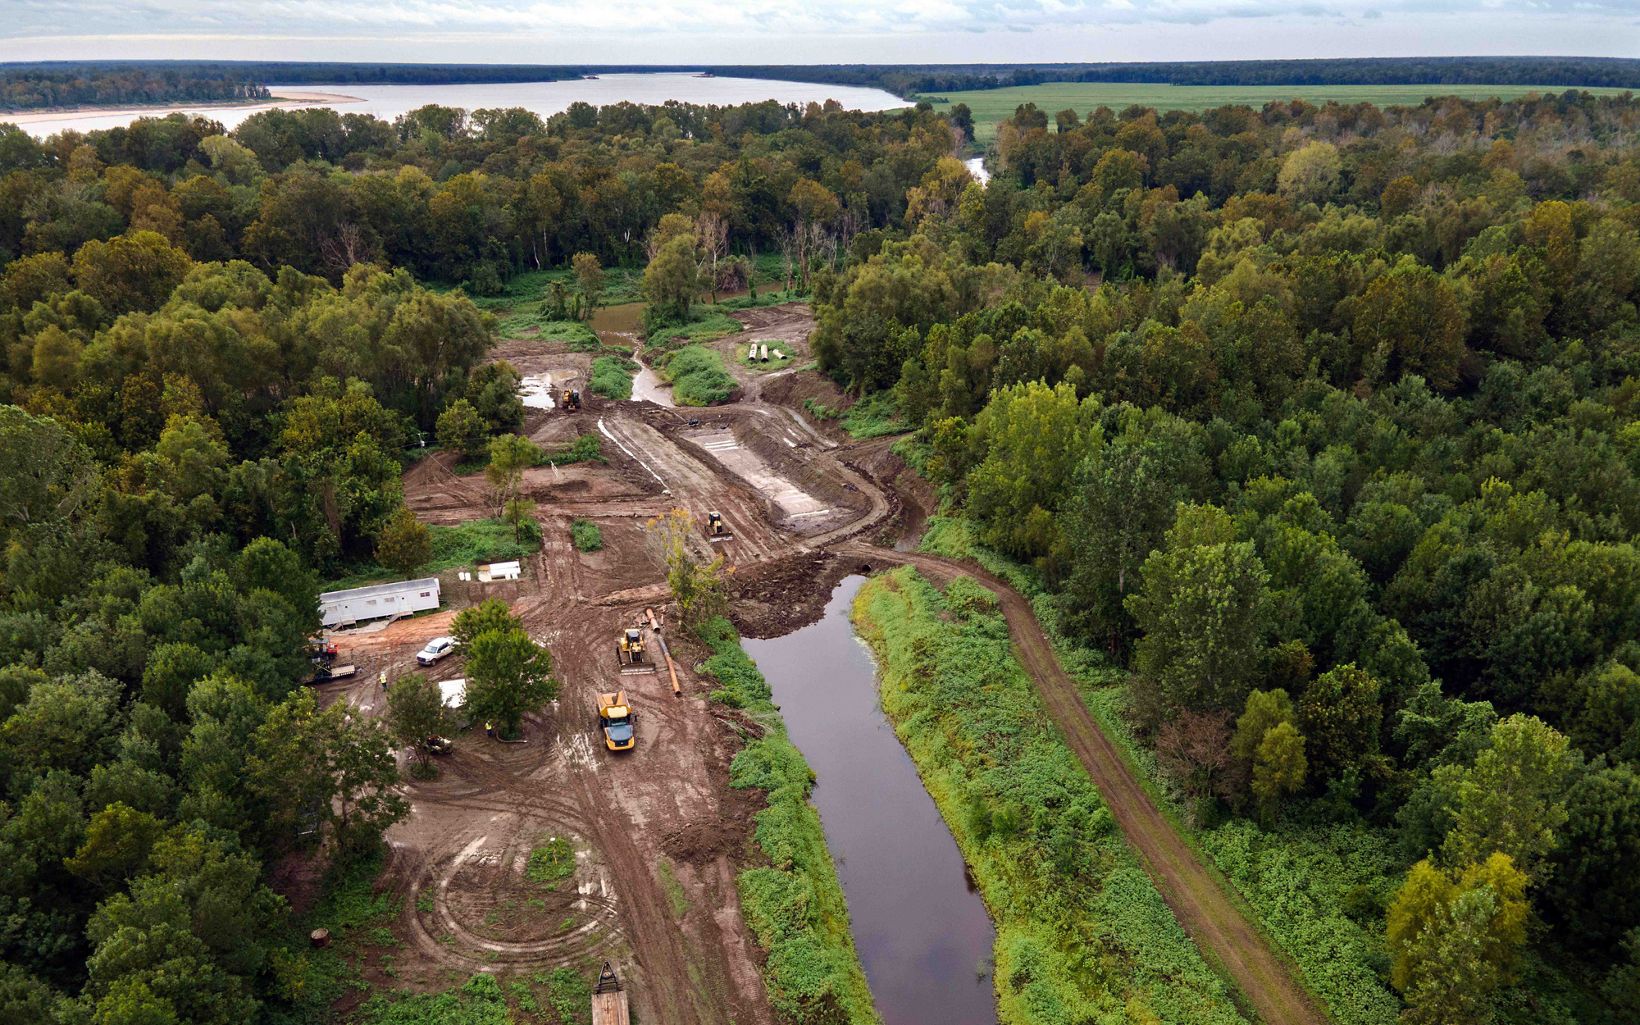 An aerial view of heavy machinery working along a canal of water and surrounded by trees. In the distance a river is visible. The heavy machinery has created swirled patterns tire marks in mud.